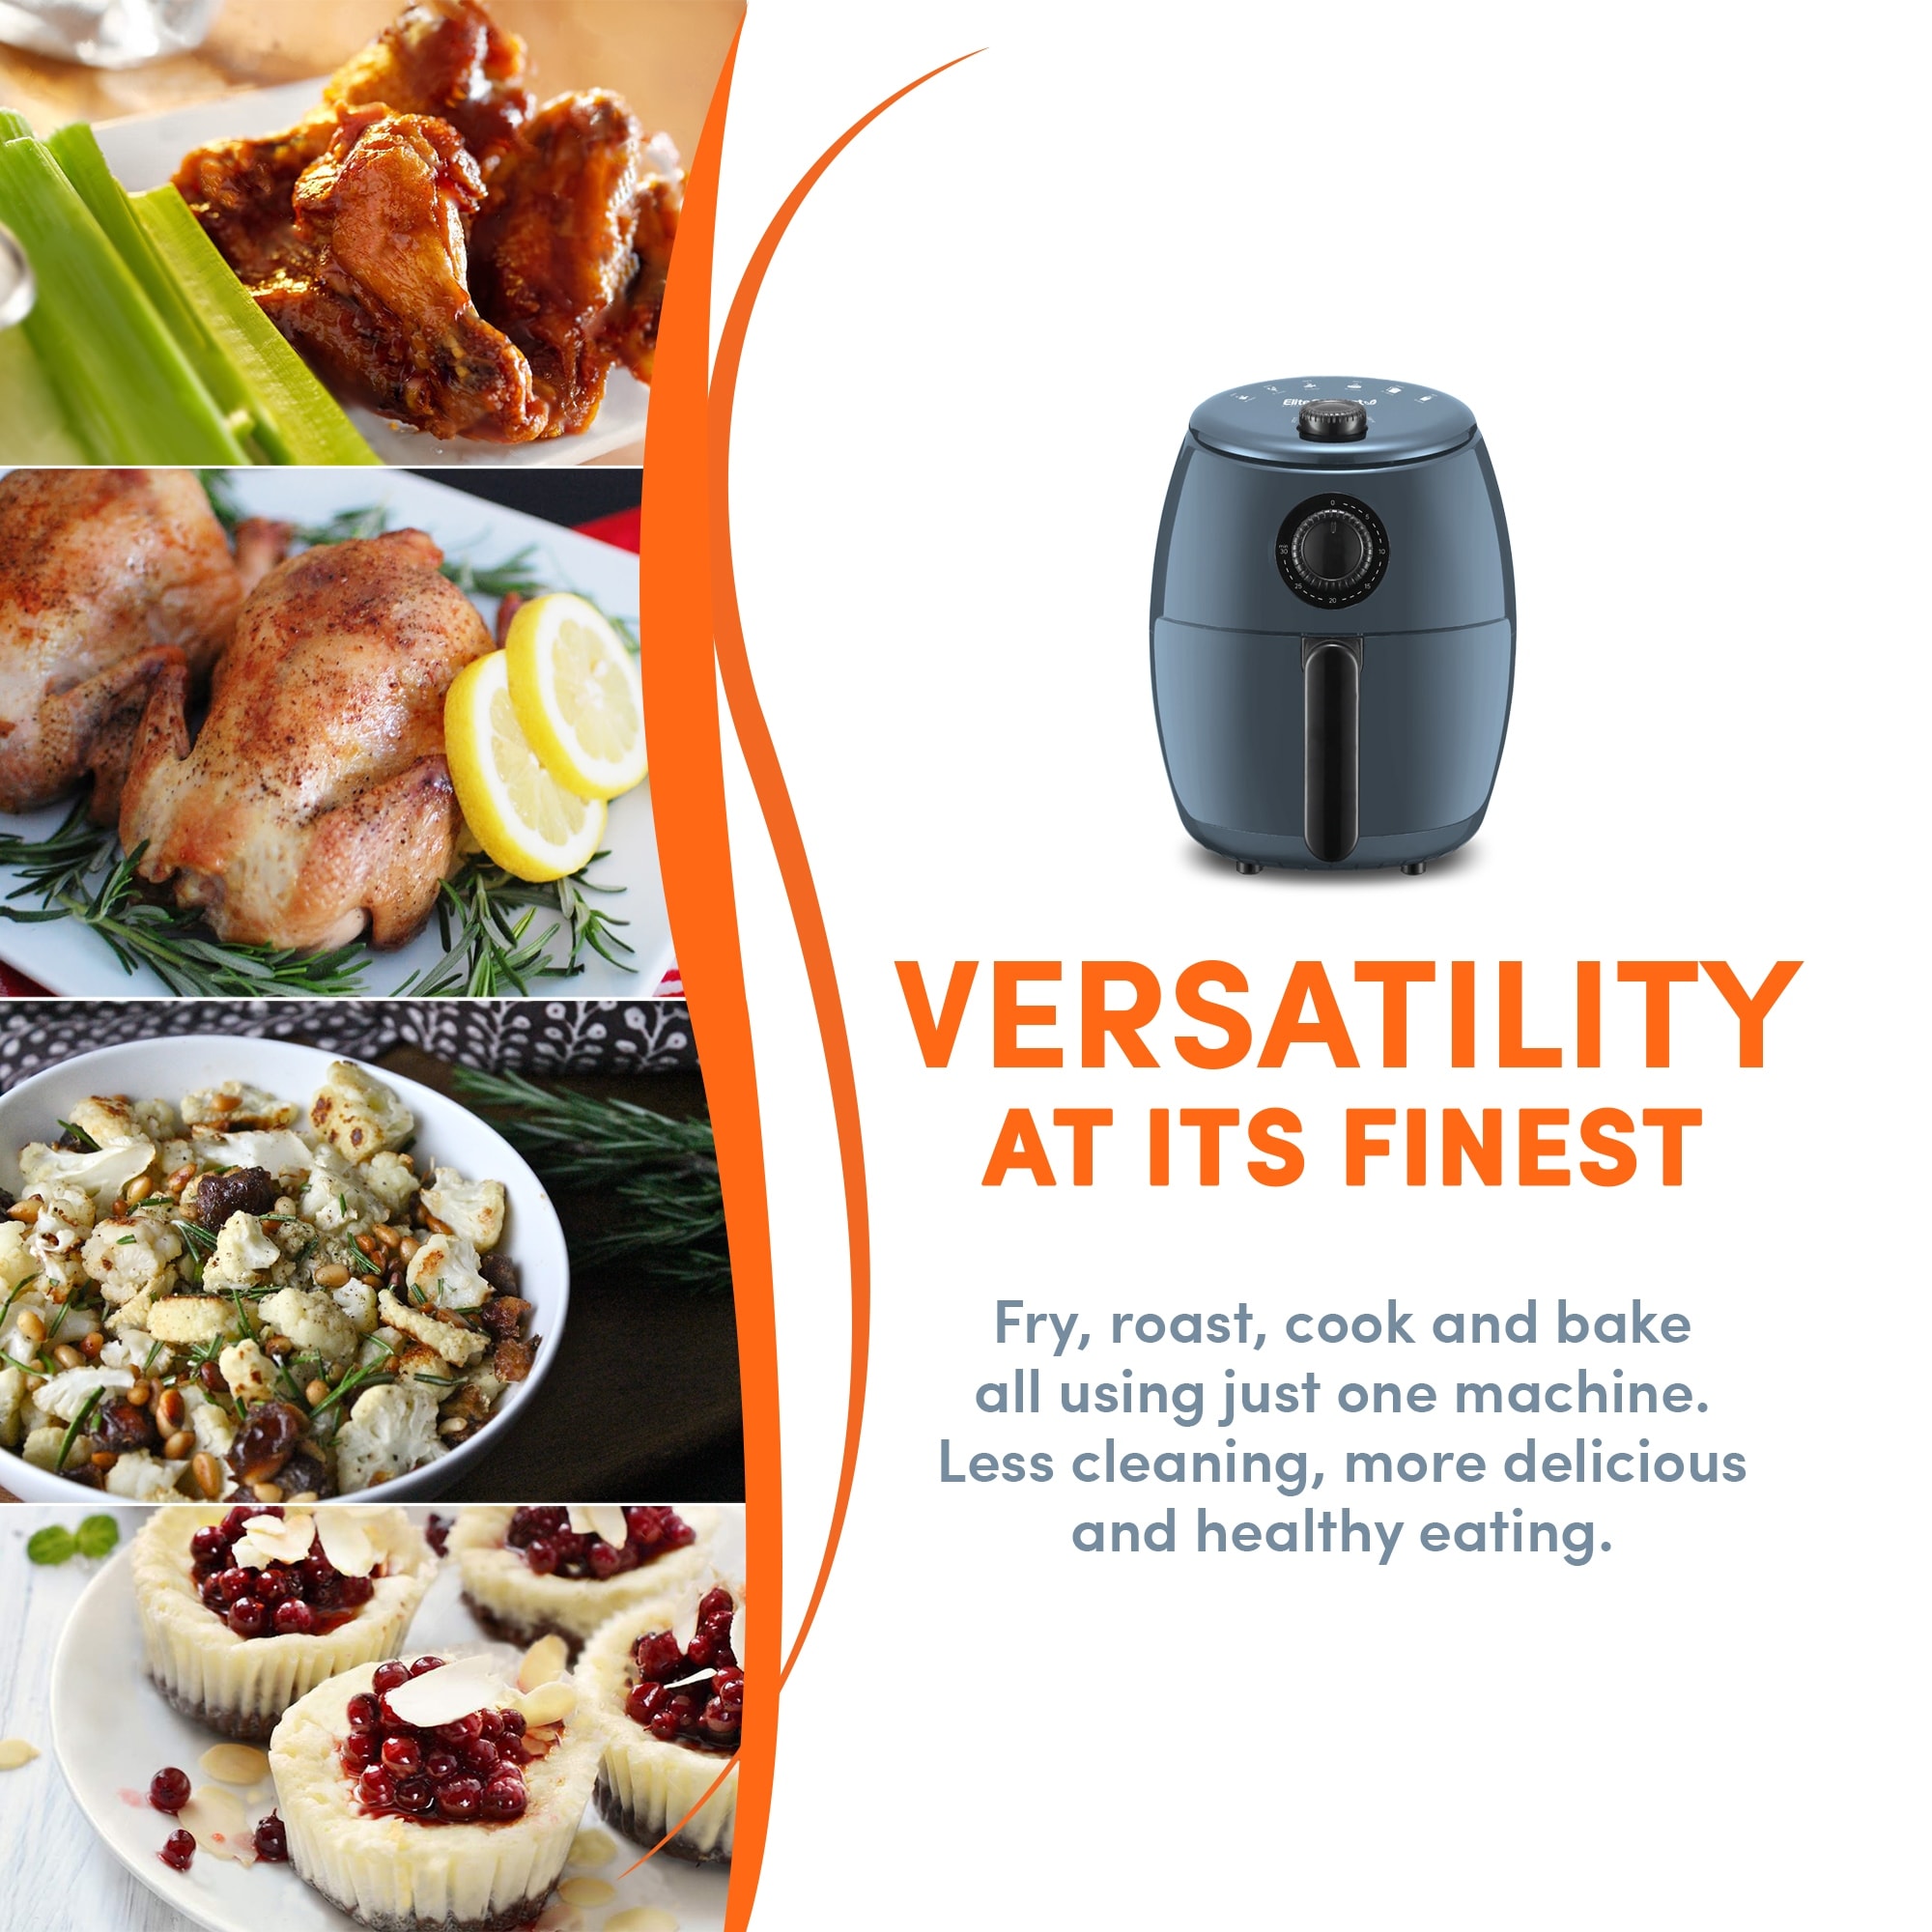 https://ak1.ostkcdn.com/images/products/is/images/direct/1998f6816ad64d7b0ef78328d346ae9c57345cde/Elite-Gourmet-2.1qt-Hot-Air-Fryer-with-Adjustable-Timer-and-Temperature-for-Oil-free-Cooking%2C-Blue-Grey.jpg